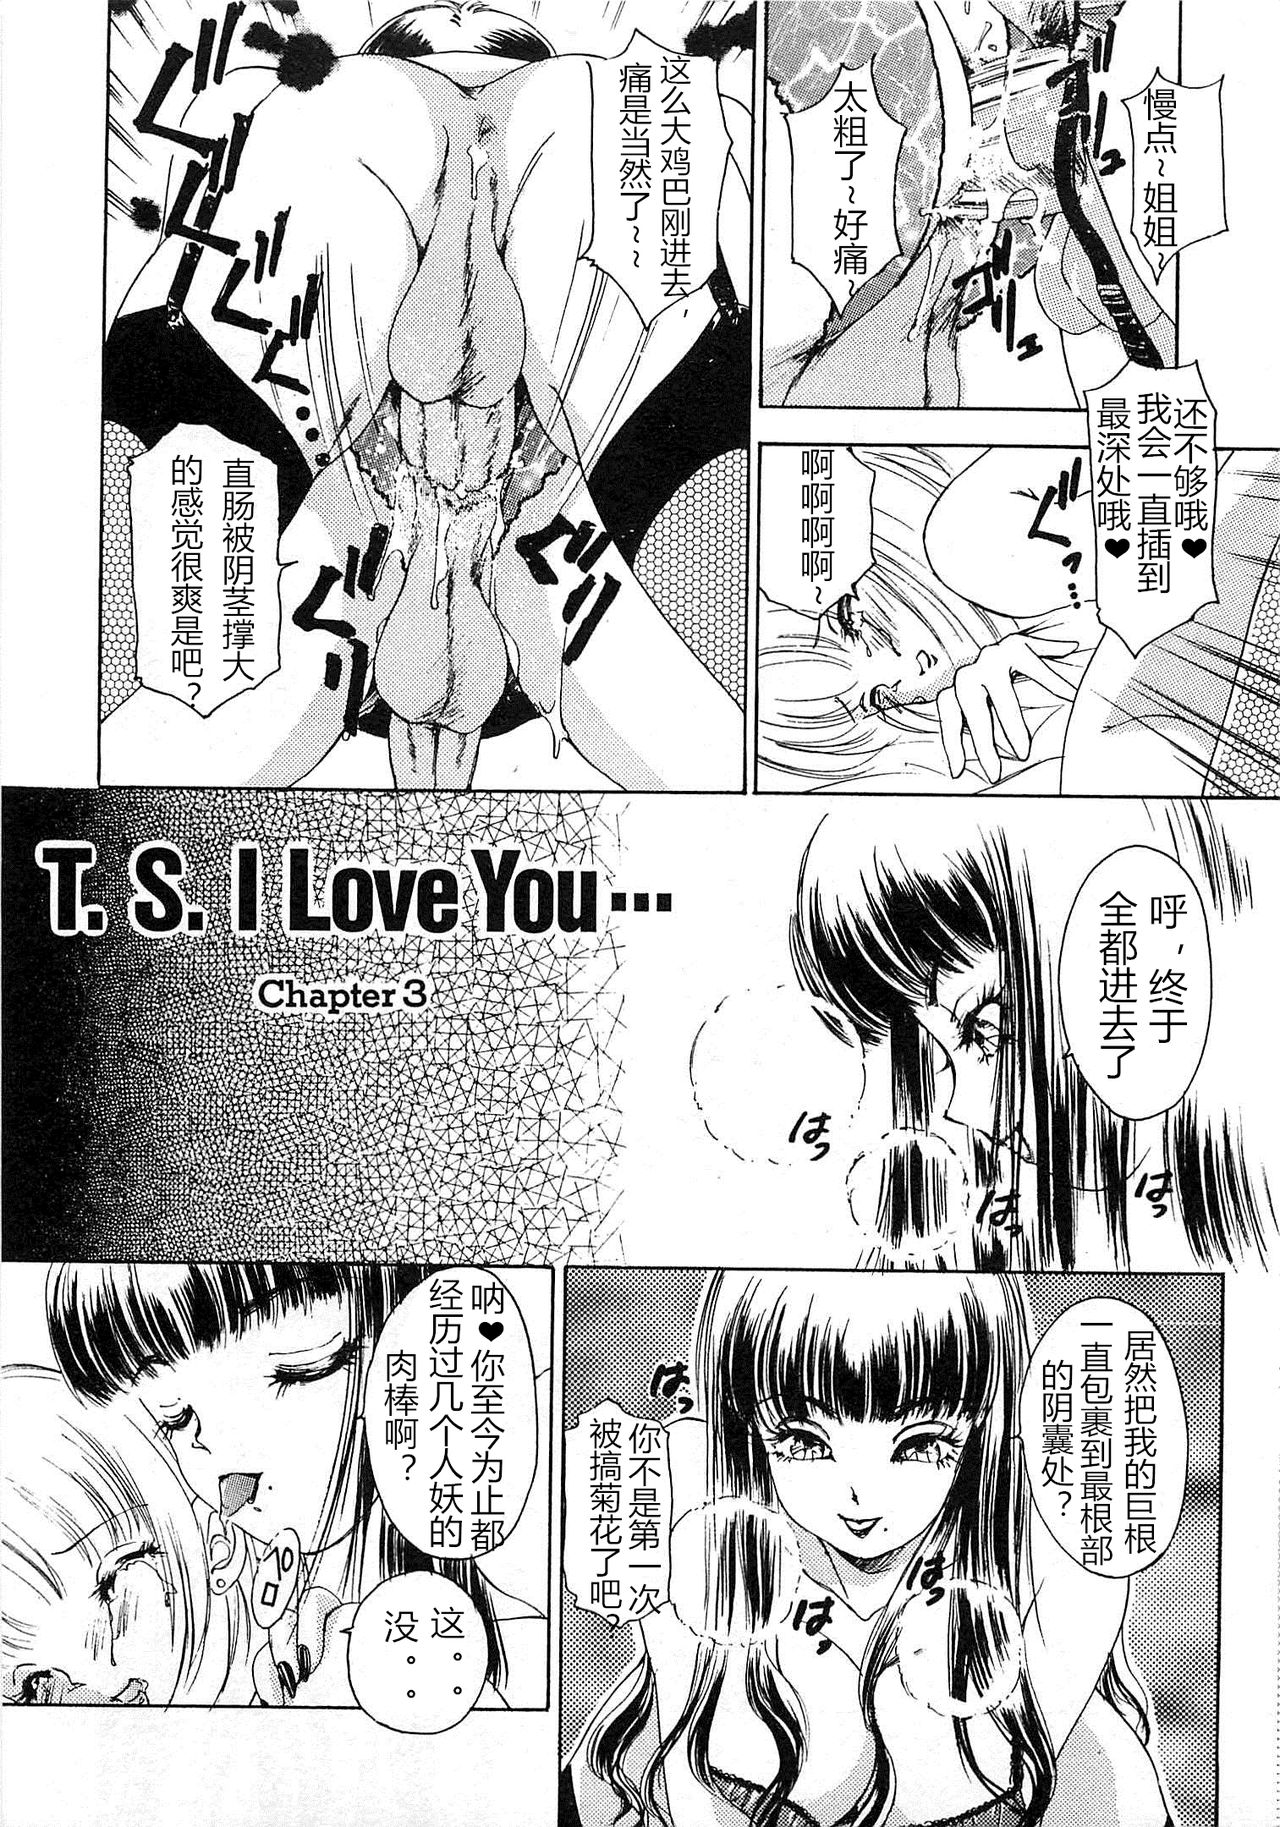 [The Amanoja9] T.S. I LOVE YOU chapter 03 [Chinese] [M男个人汉化] [The Amanoja9] T.S. I LOVE YOU chapter 03 [中国翻訳]